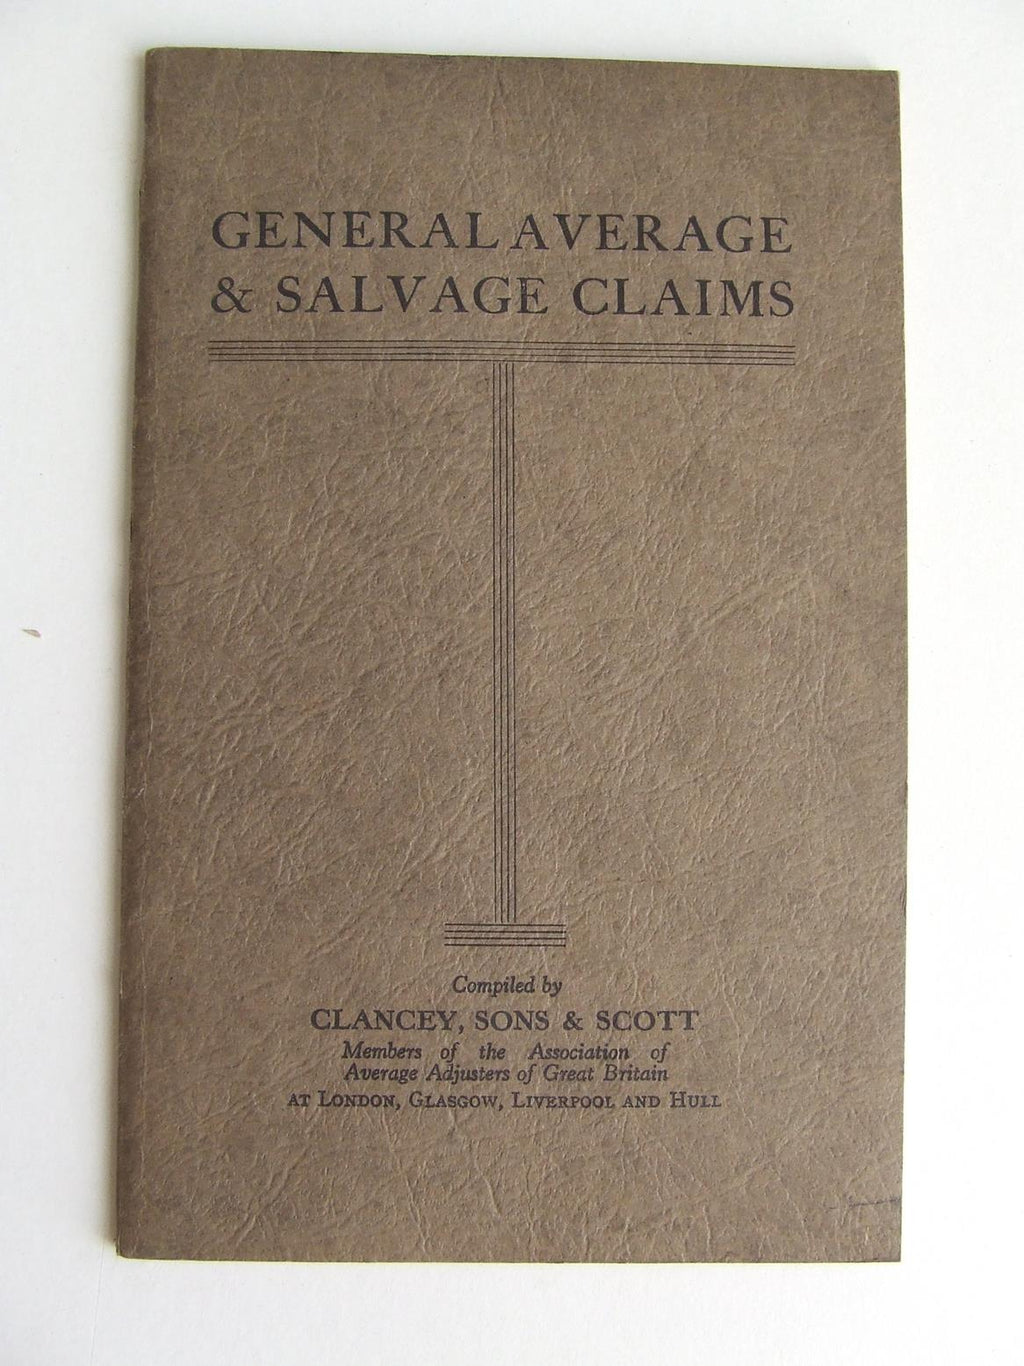 General Average & Salvage Claims